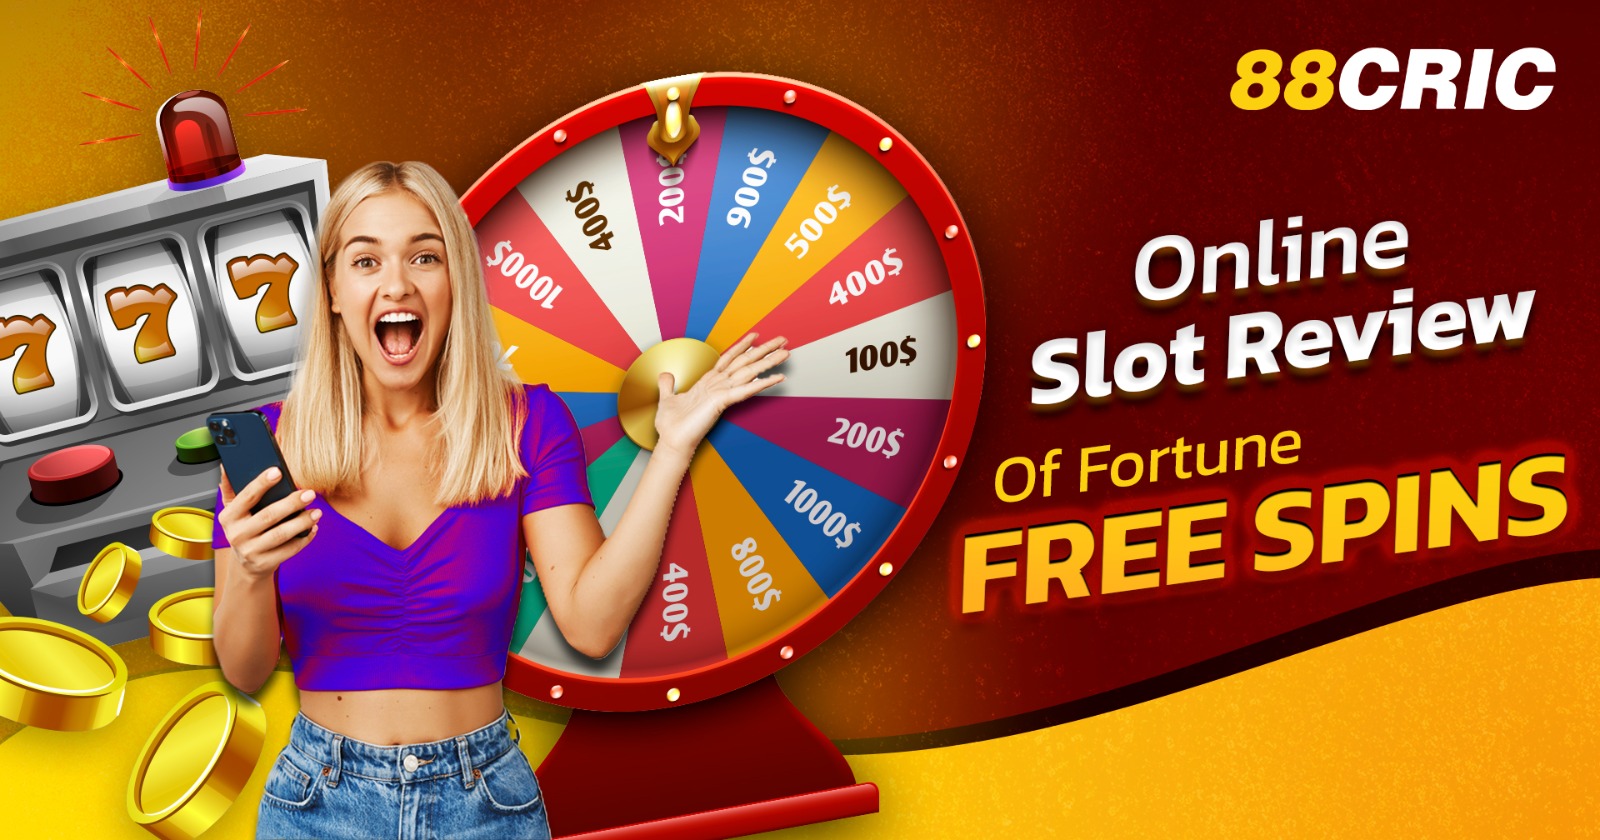 Online Slot Review Of Fortune Free Spins - 88cric